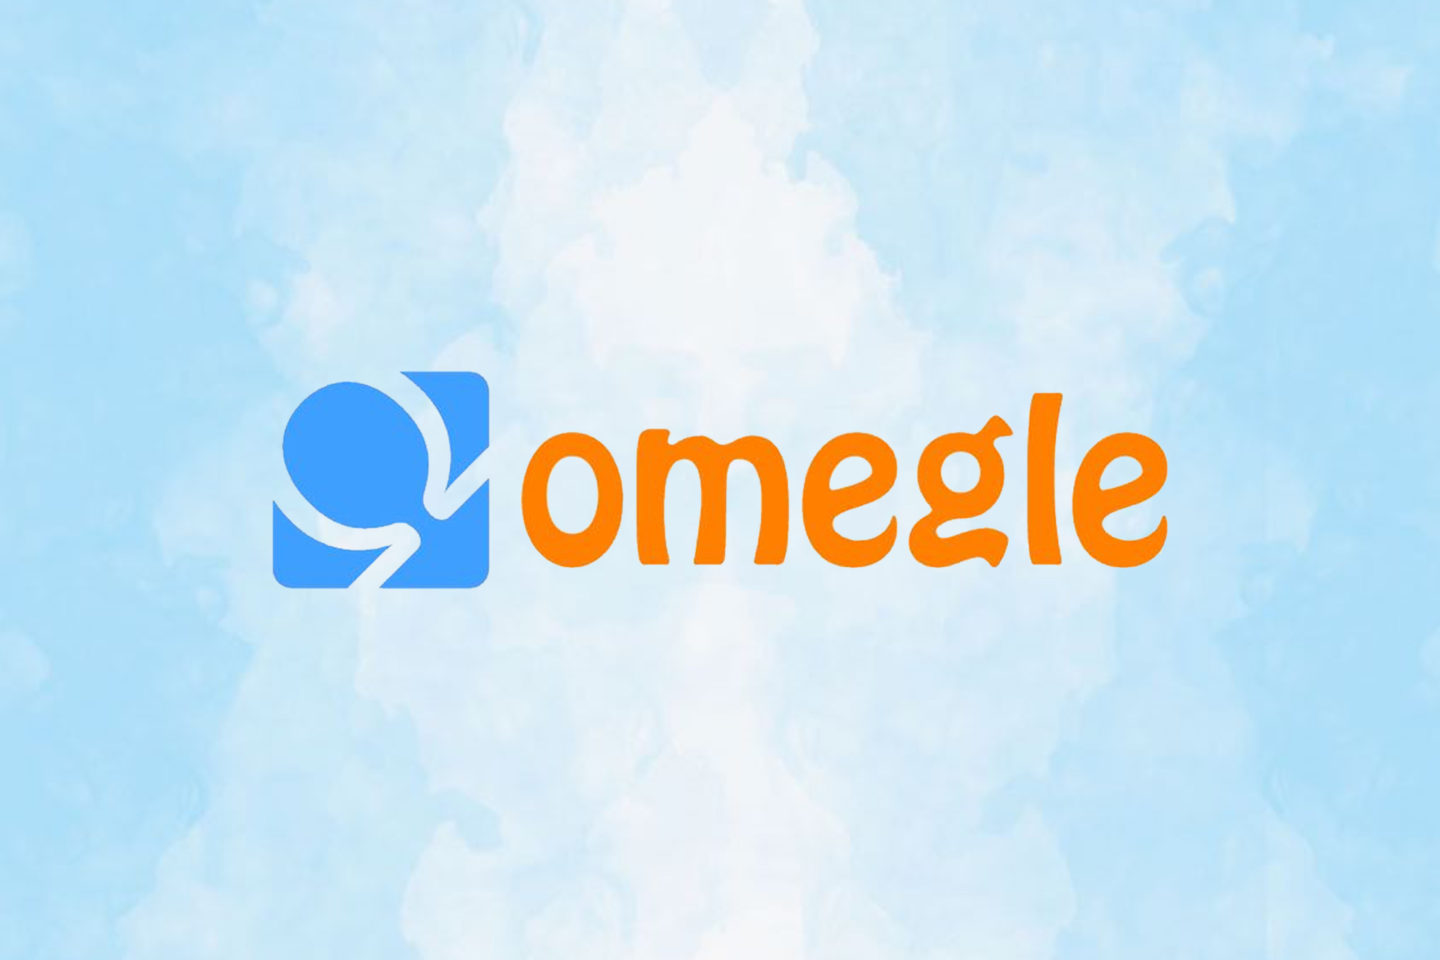 omegles-demise-marks-the-end-of-an-era-for-anonymous-online-connection